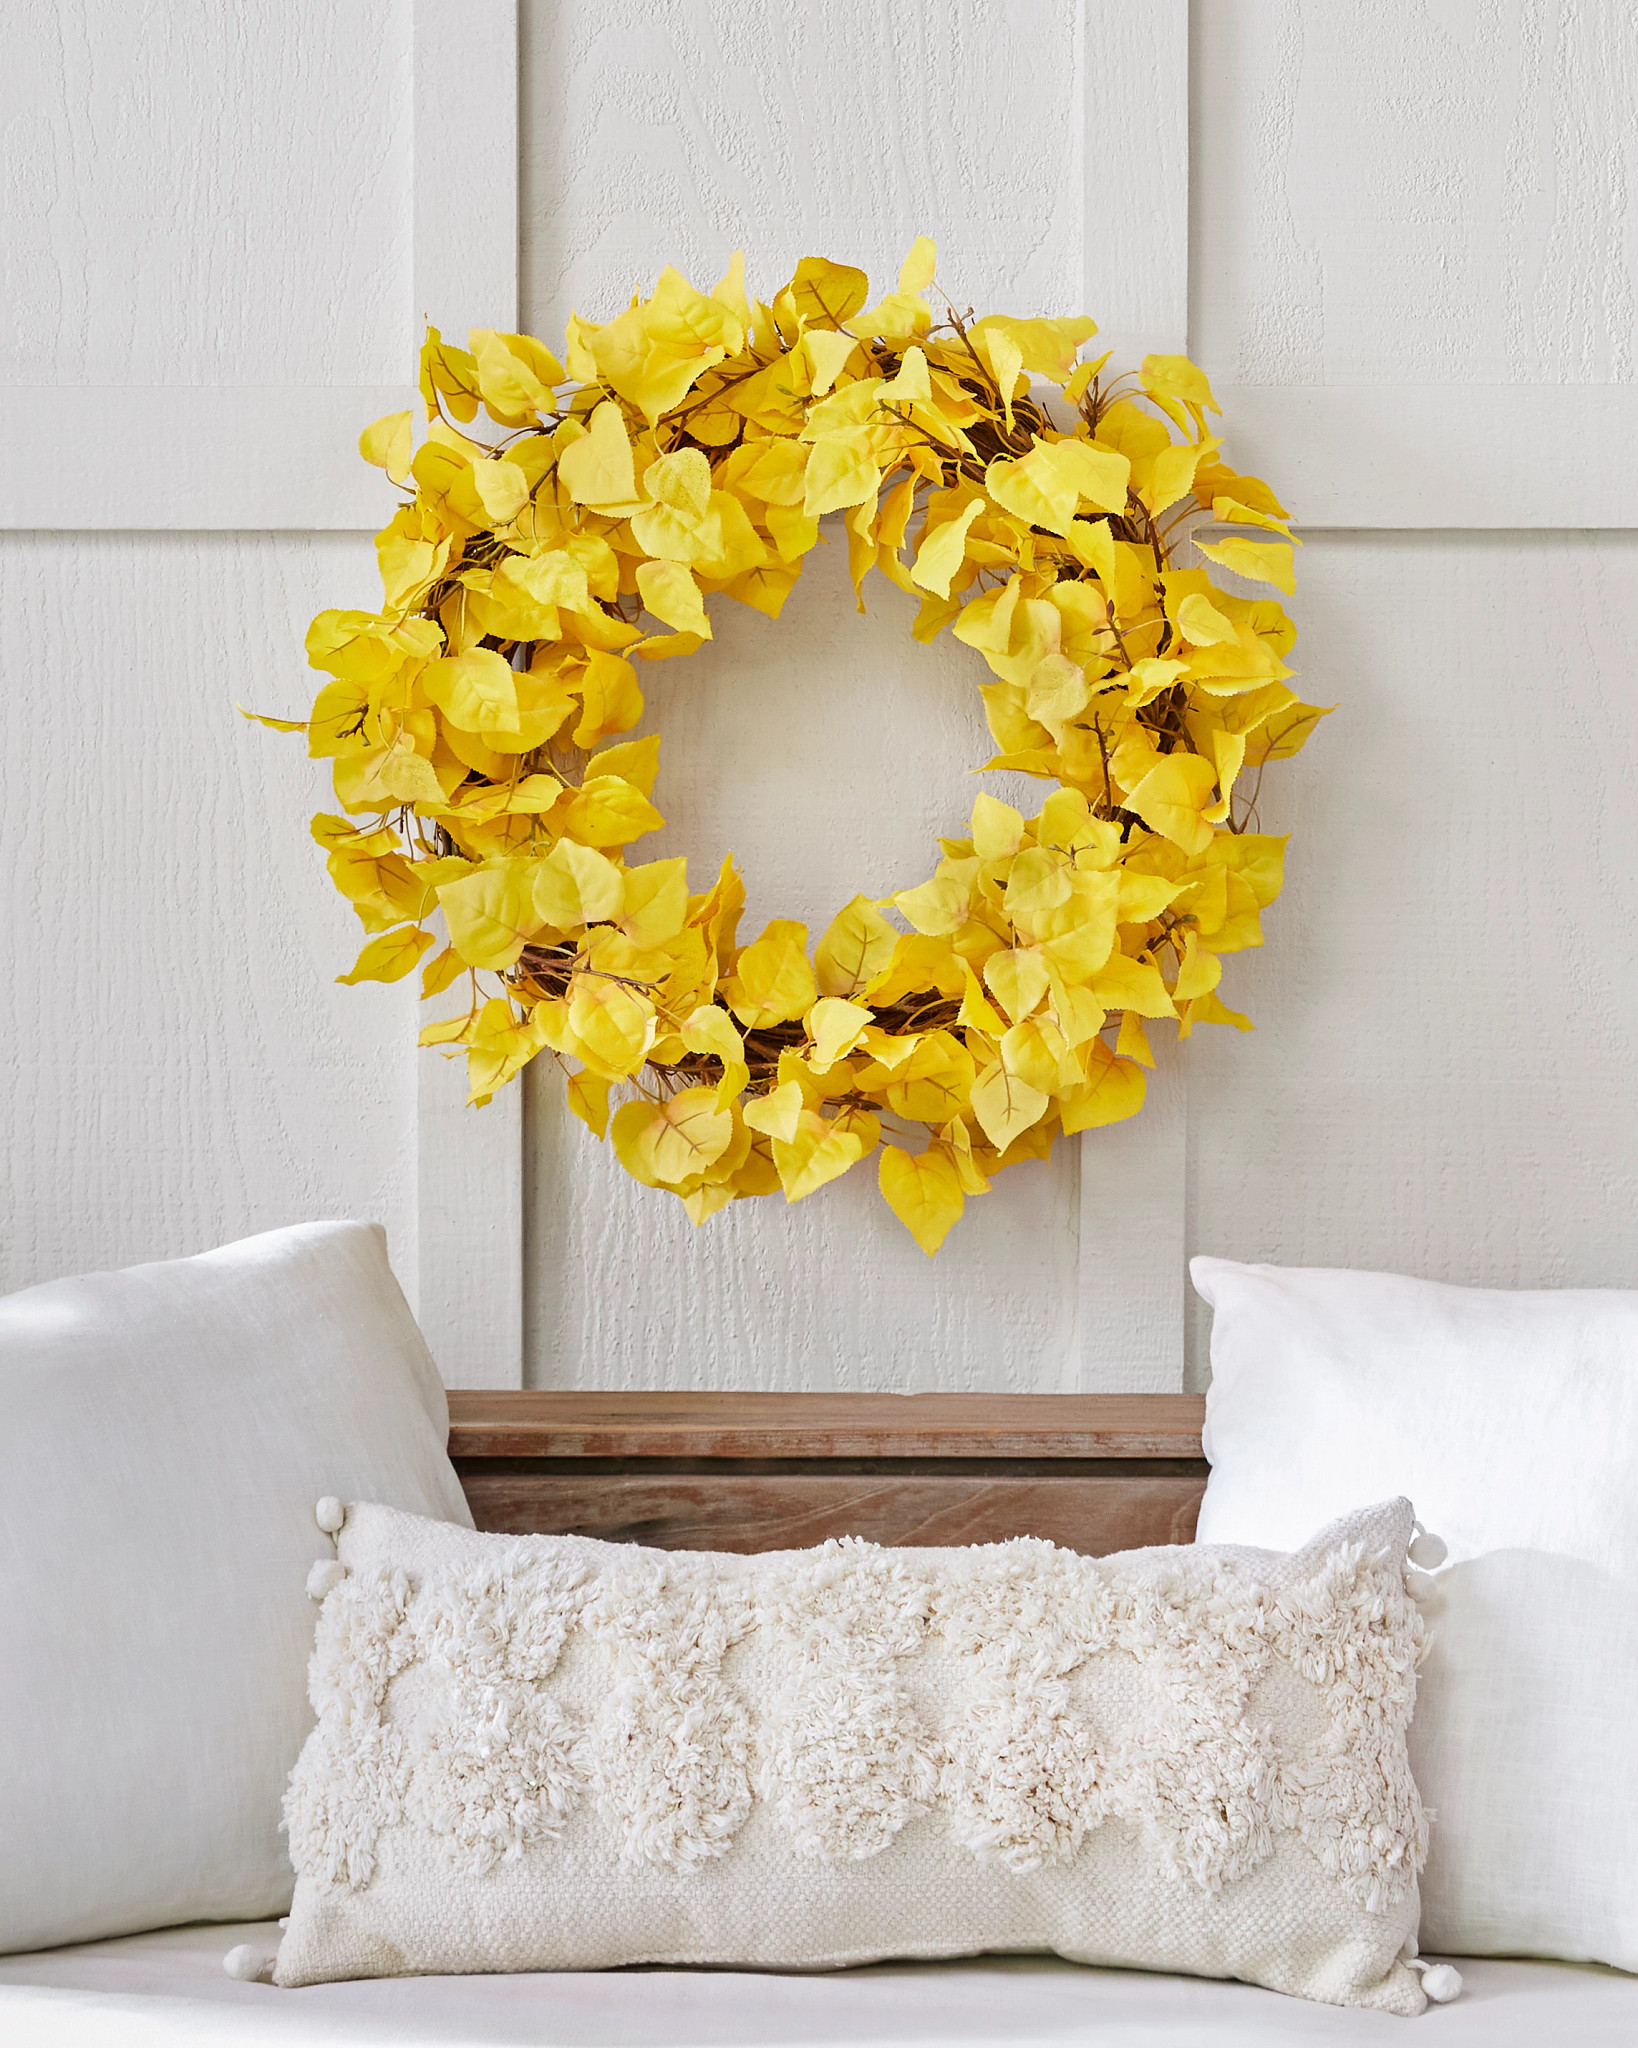 Yellow wreath hanging over a headboard and pillows